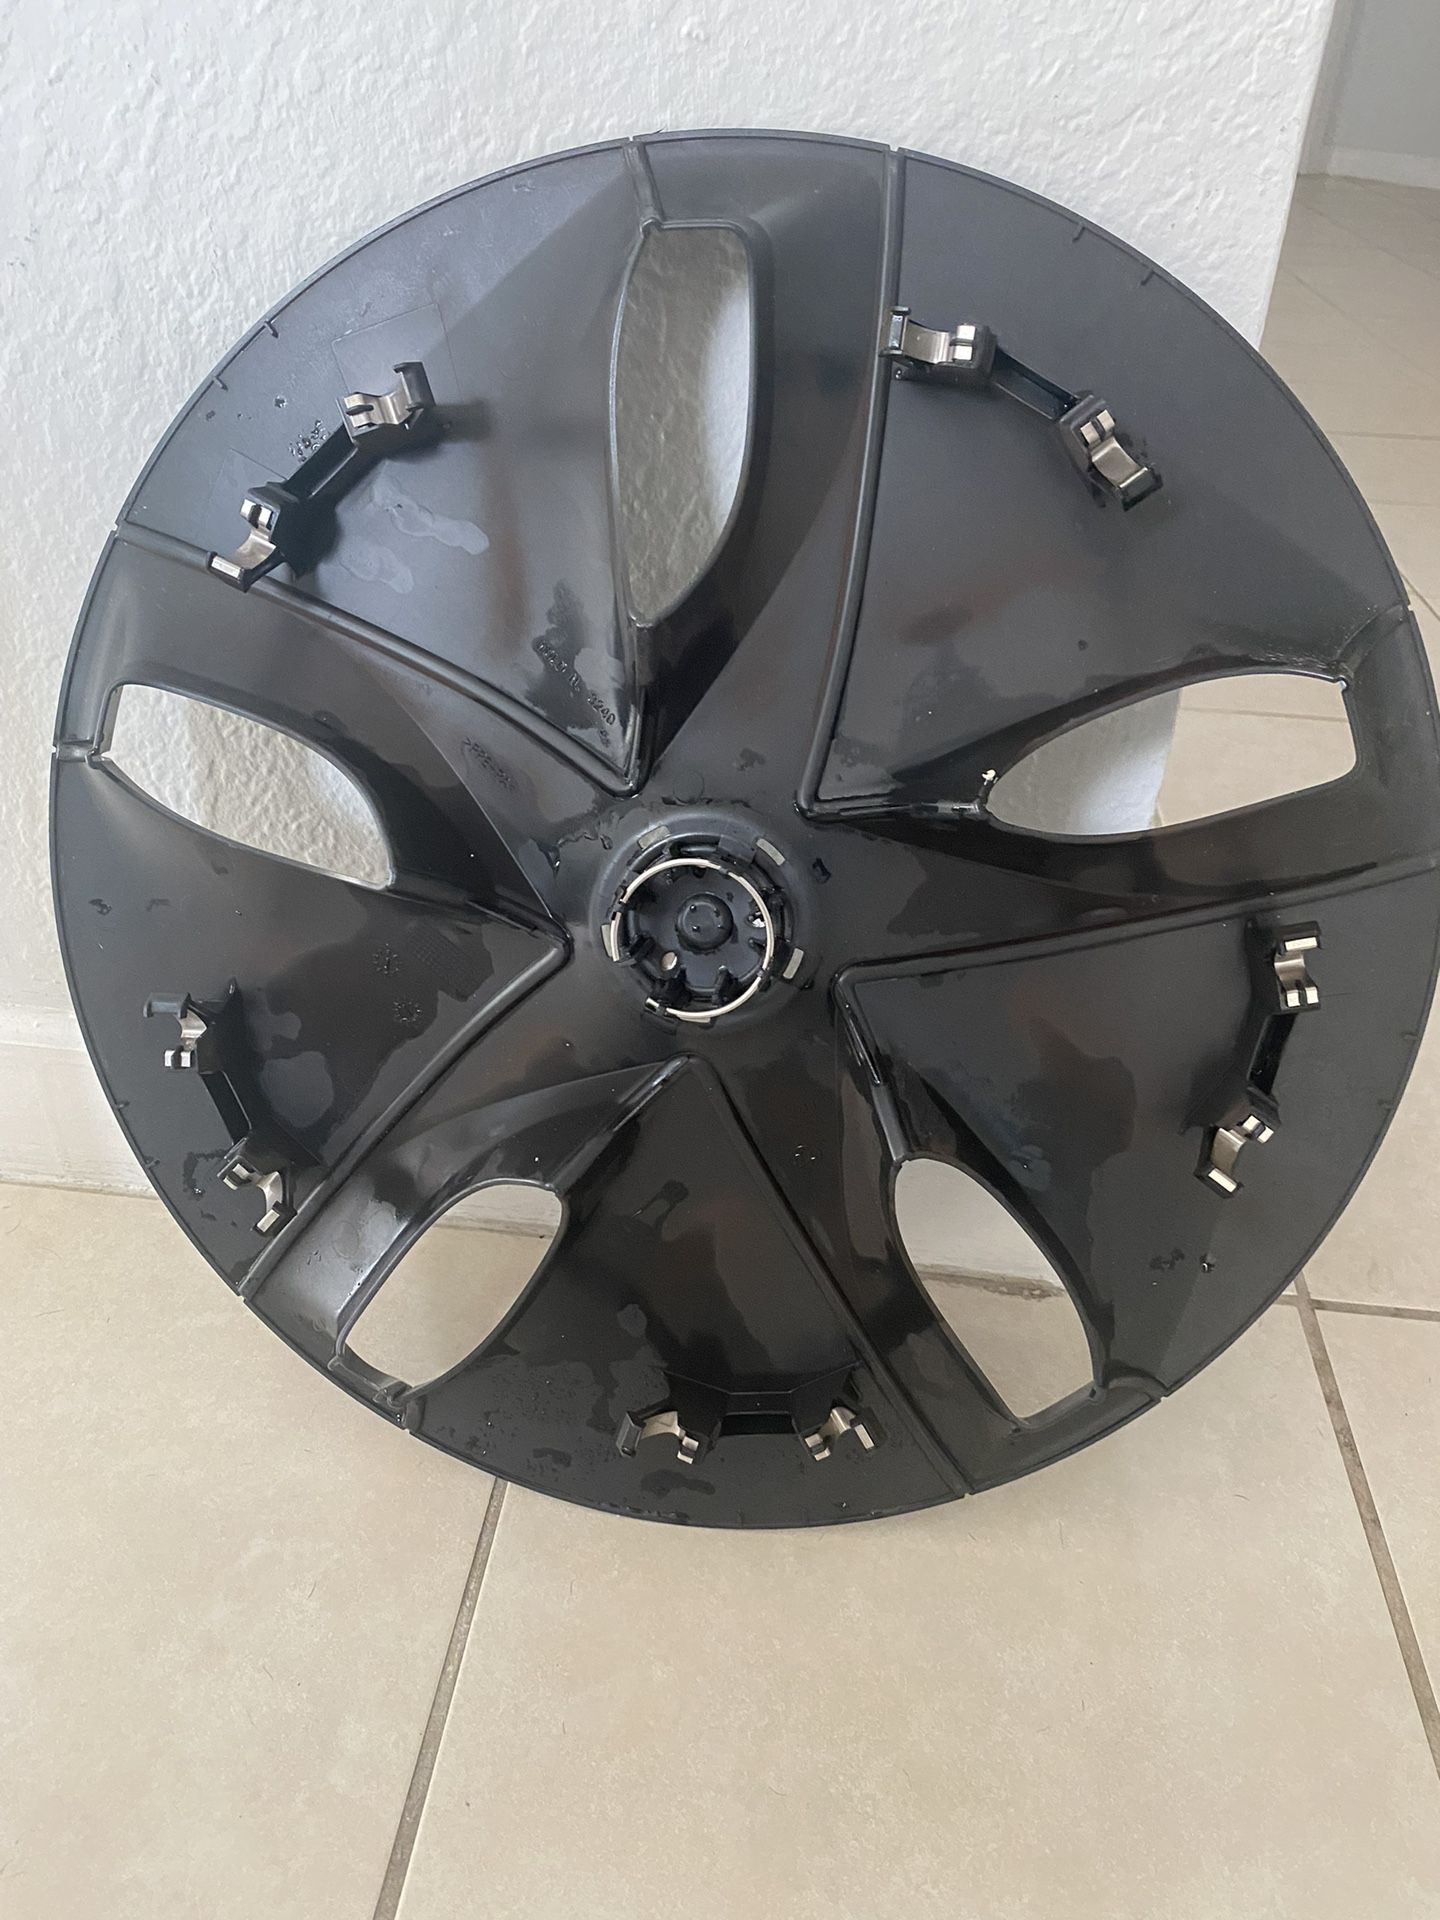 Description Tesla Hub cap. 19" only one. Located in west Kendall 33194